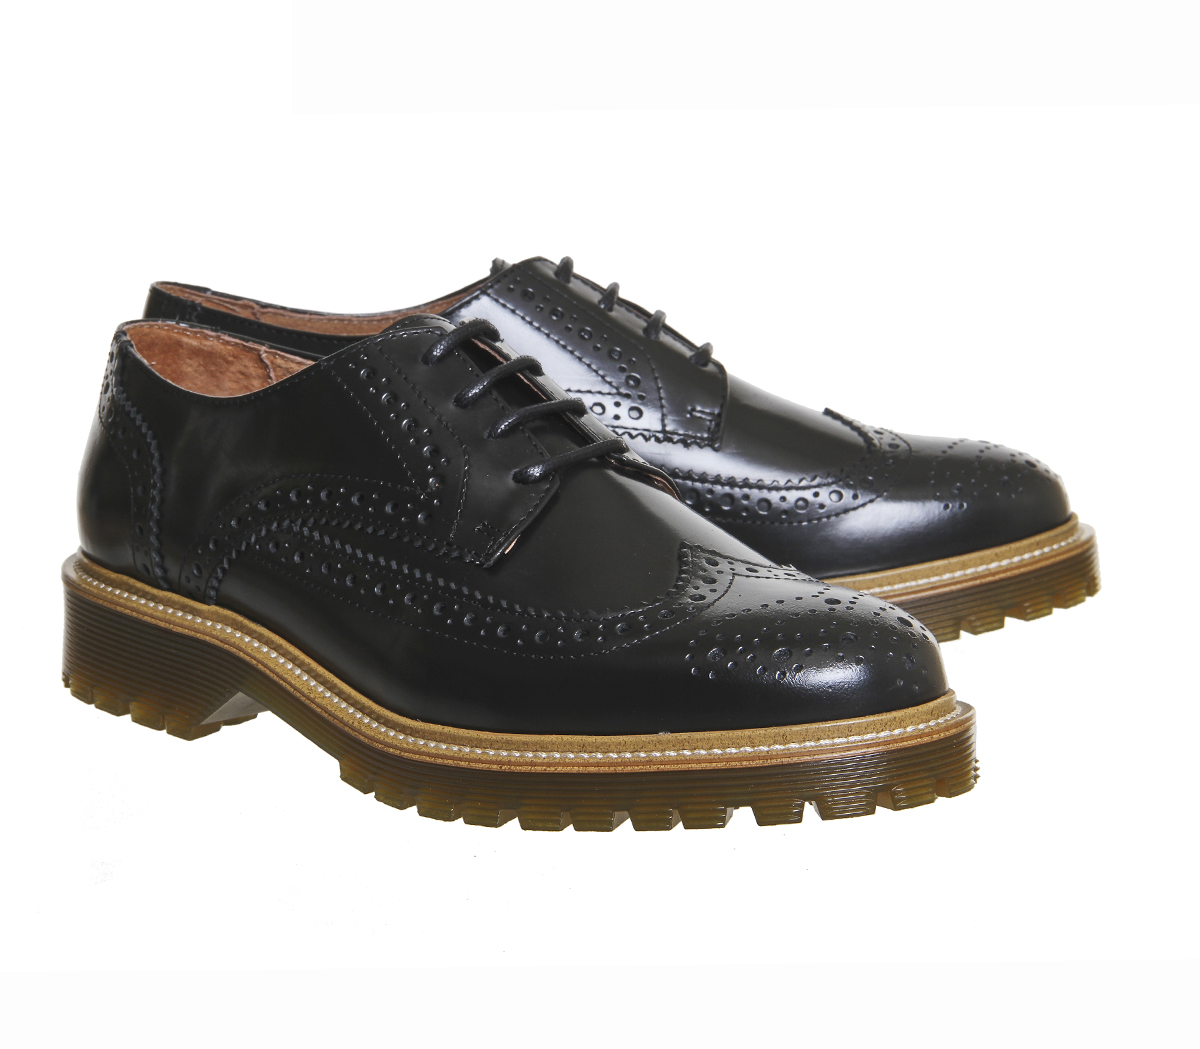 OFFICE Careless Brogue Lace Ups Black Box Leather - Men's Casual Shoes